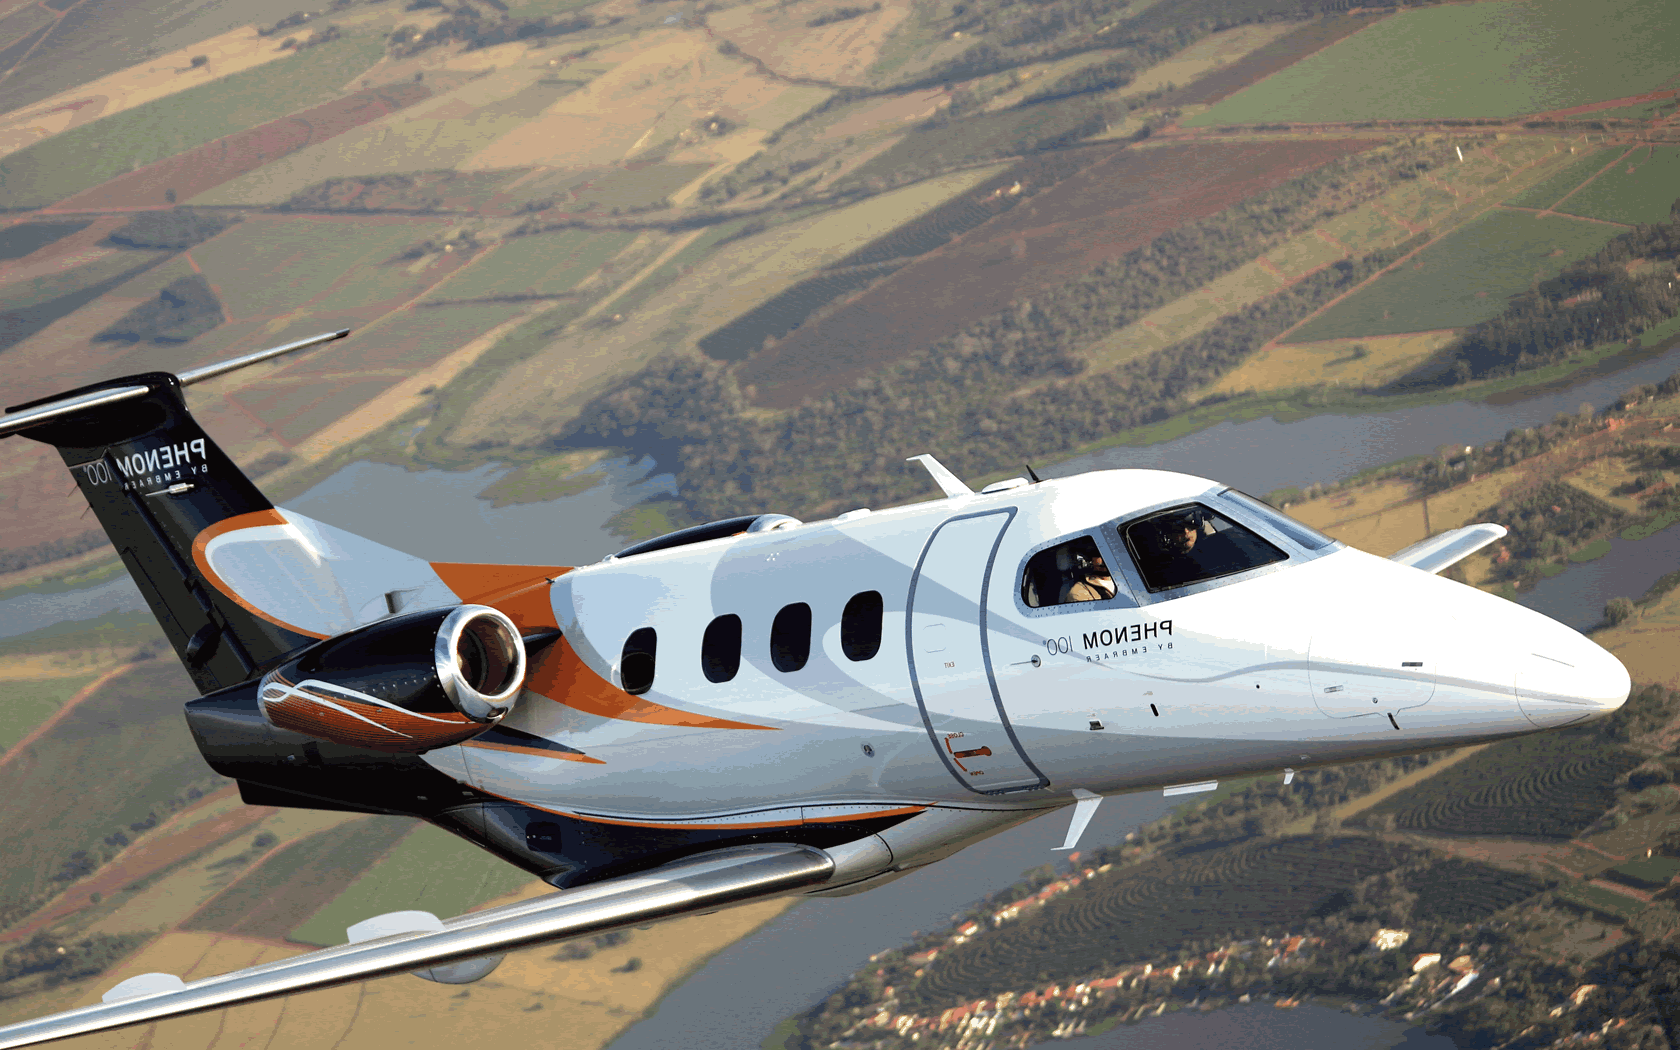 Charter Phenom 100 Private Jet From 790 Per Flying Hour